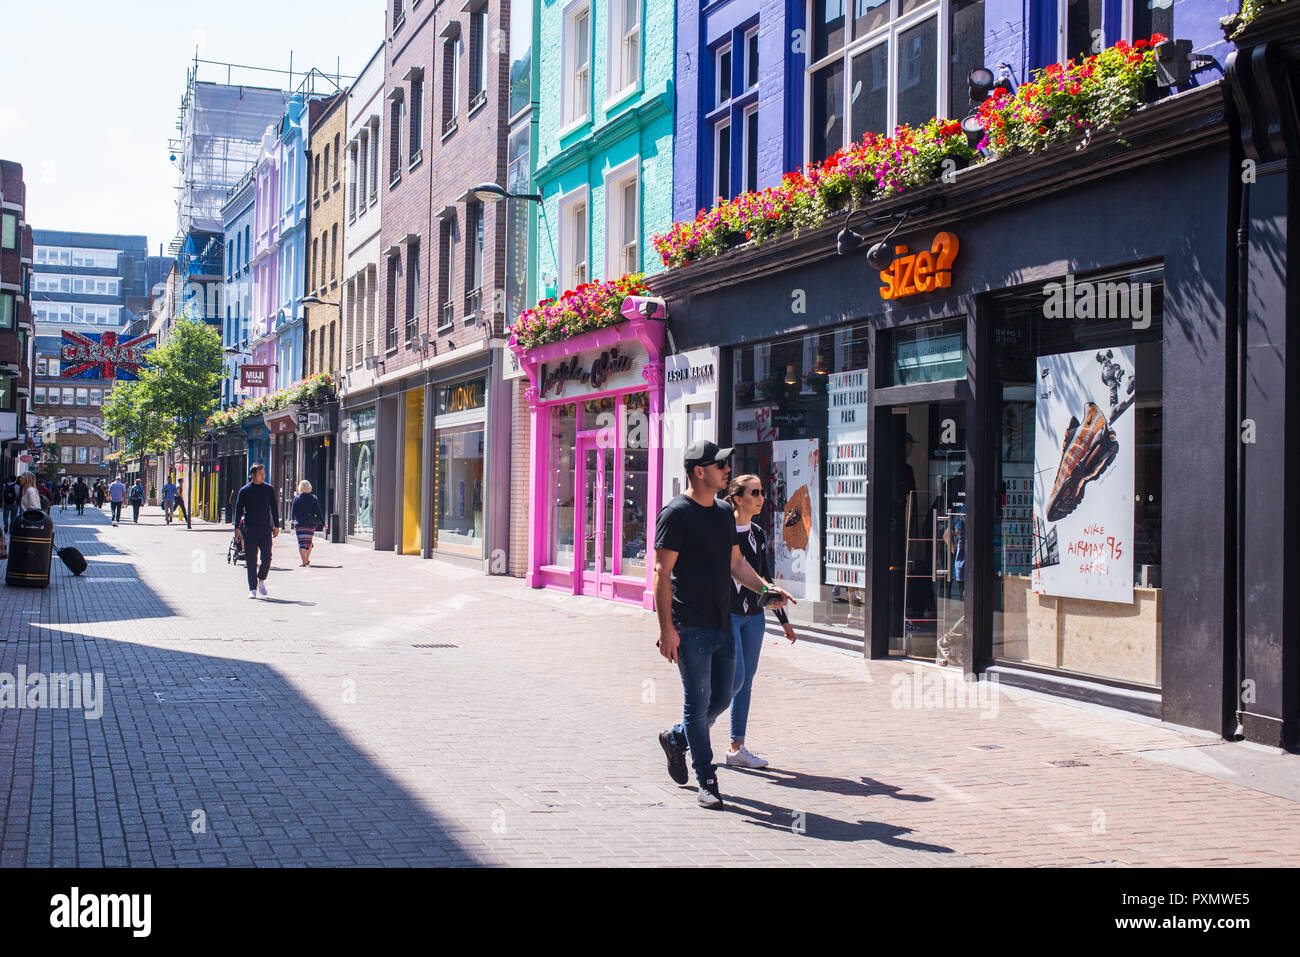 London, England , UK - June 2018: Tourists and people walking and shopping in Carnaby street, London, UK Stock Photo